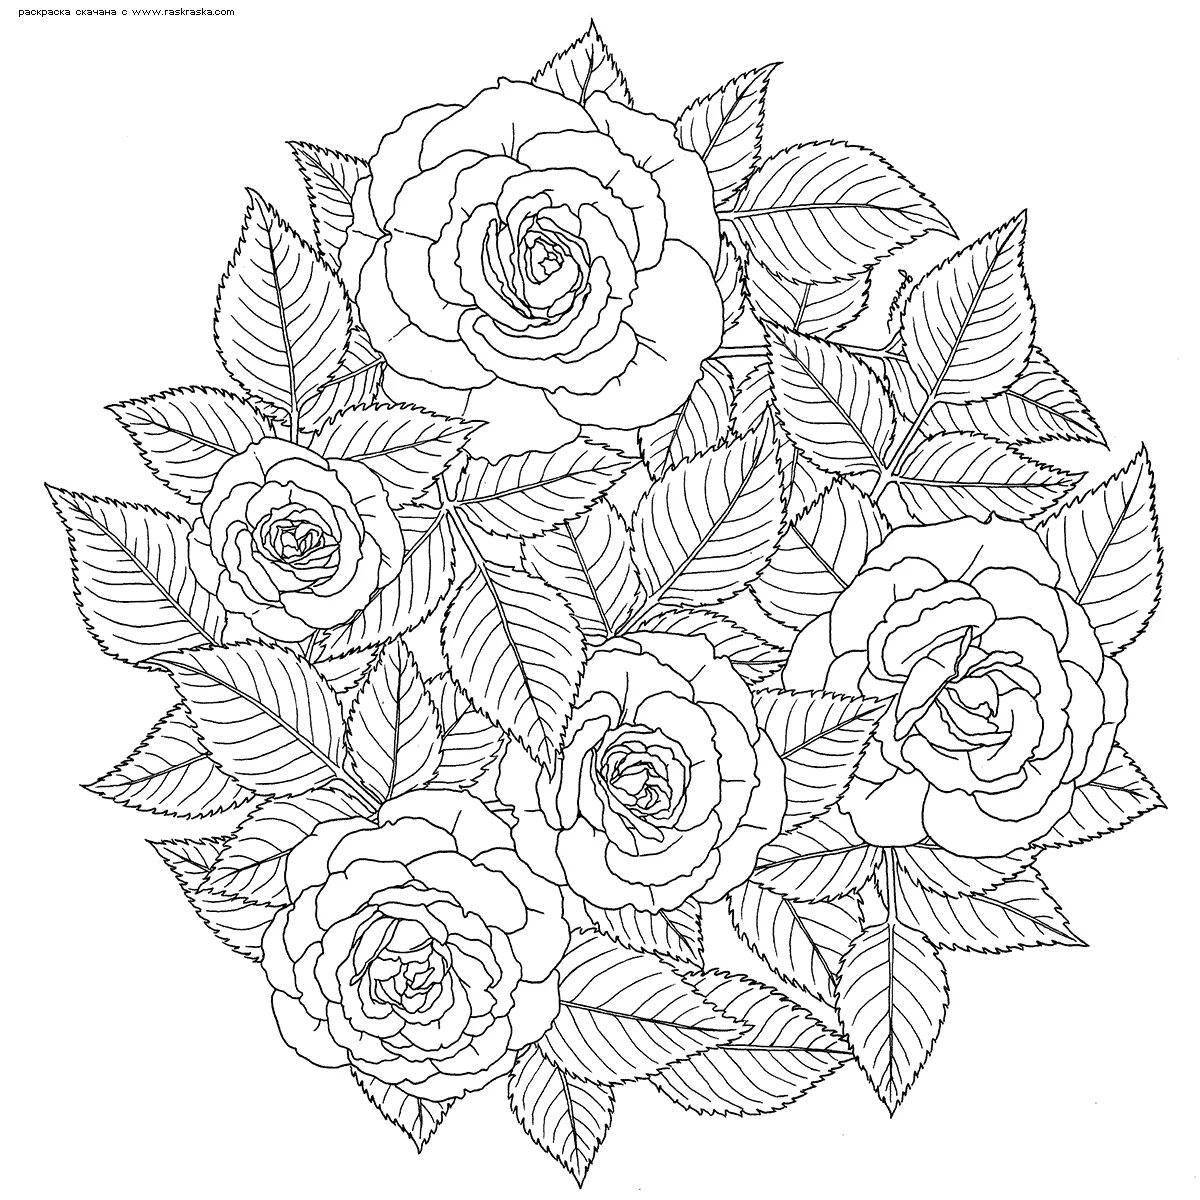 Great antistress flower coloring book